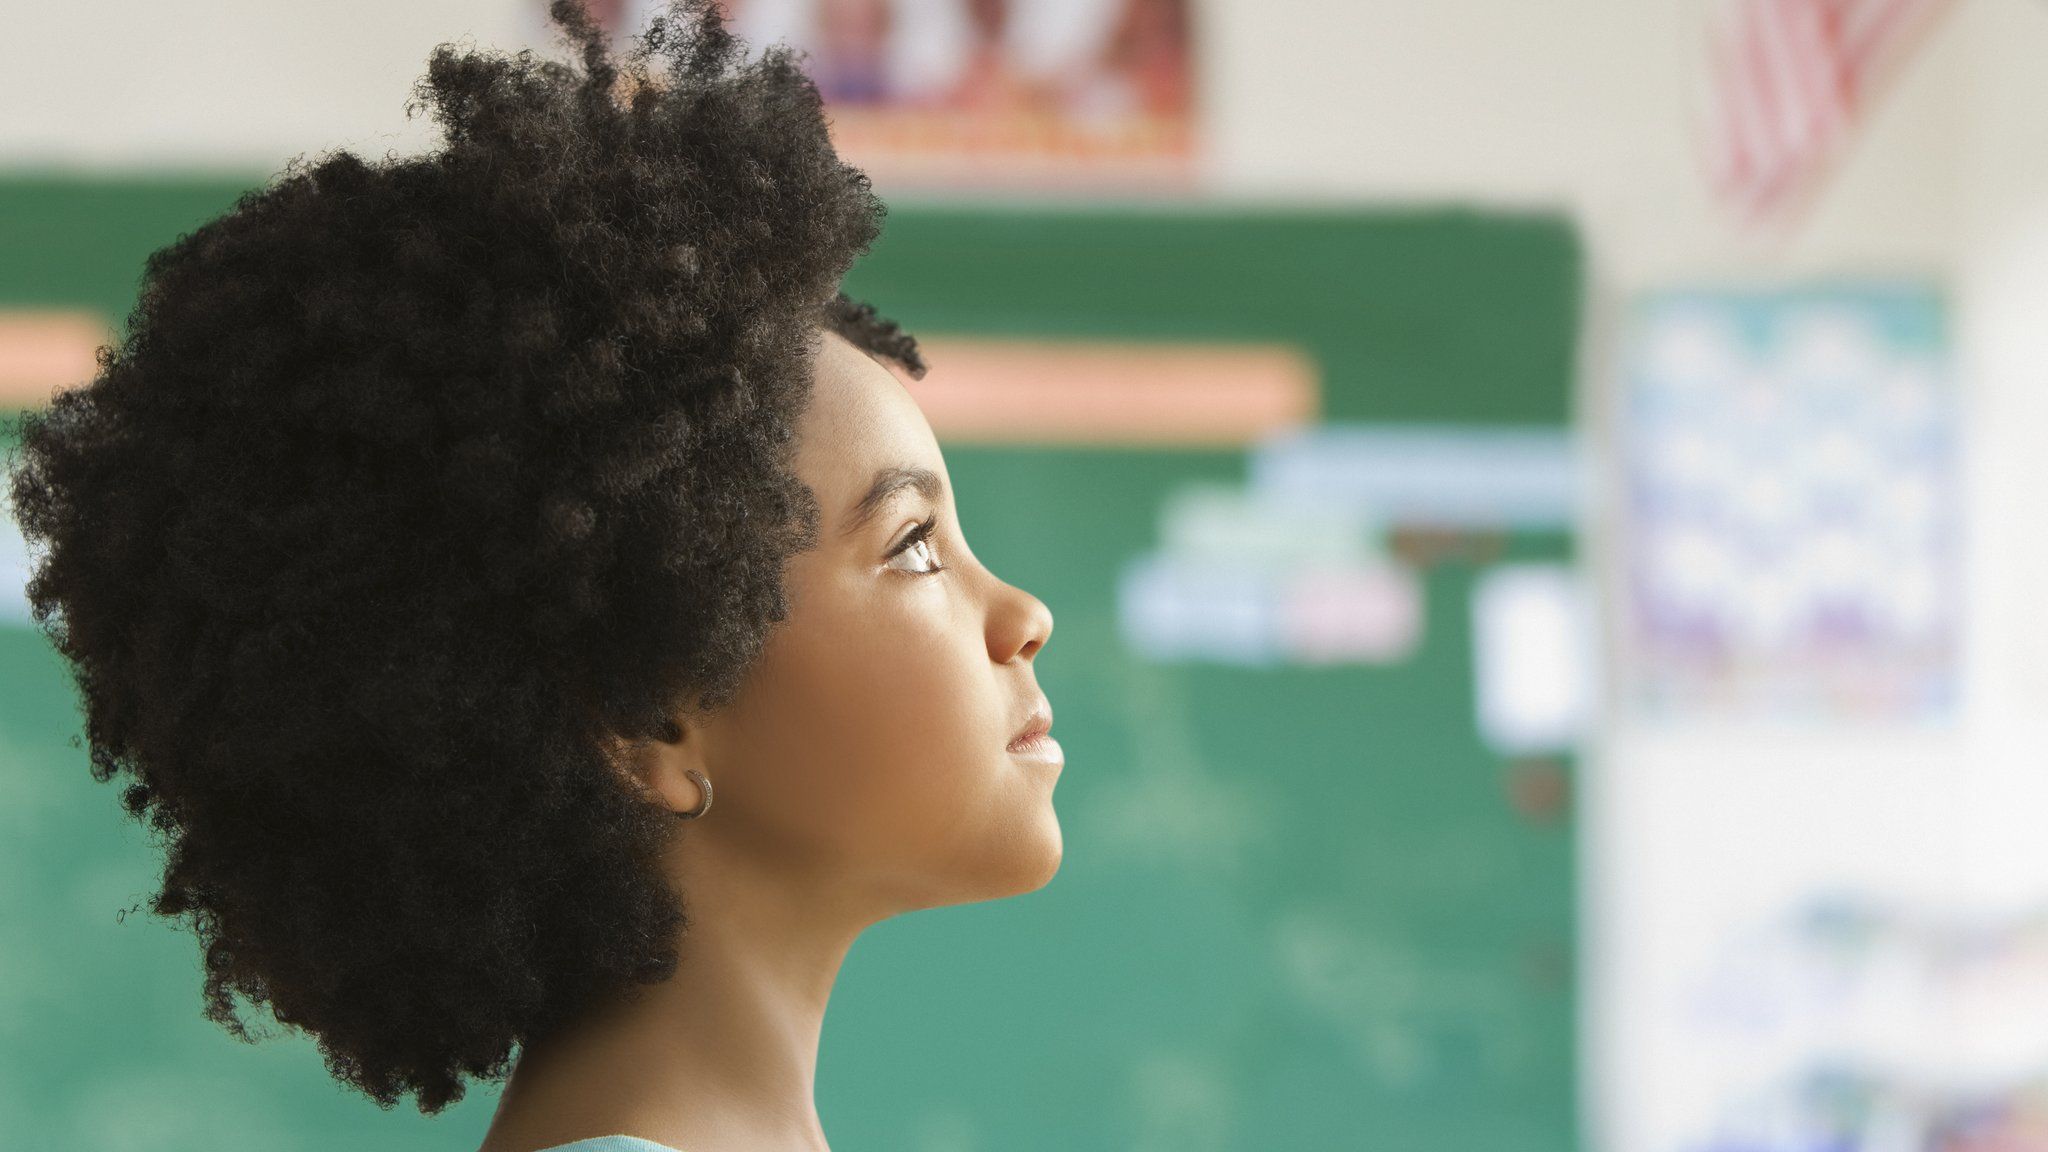 Girl with afro hair in school classroom